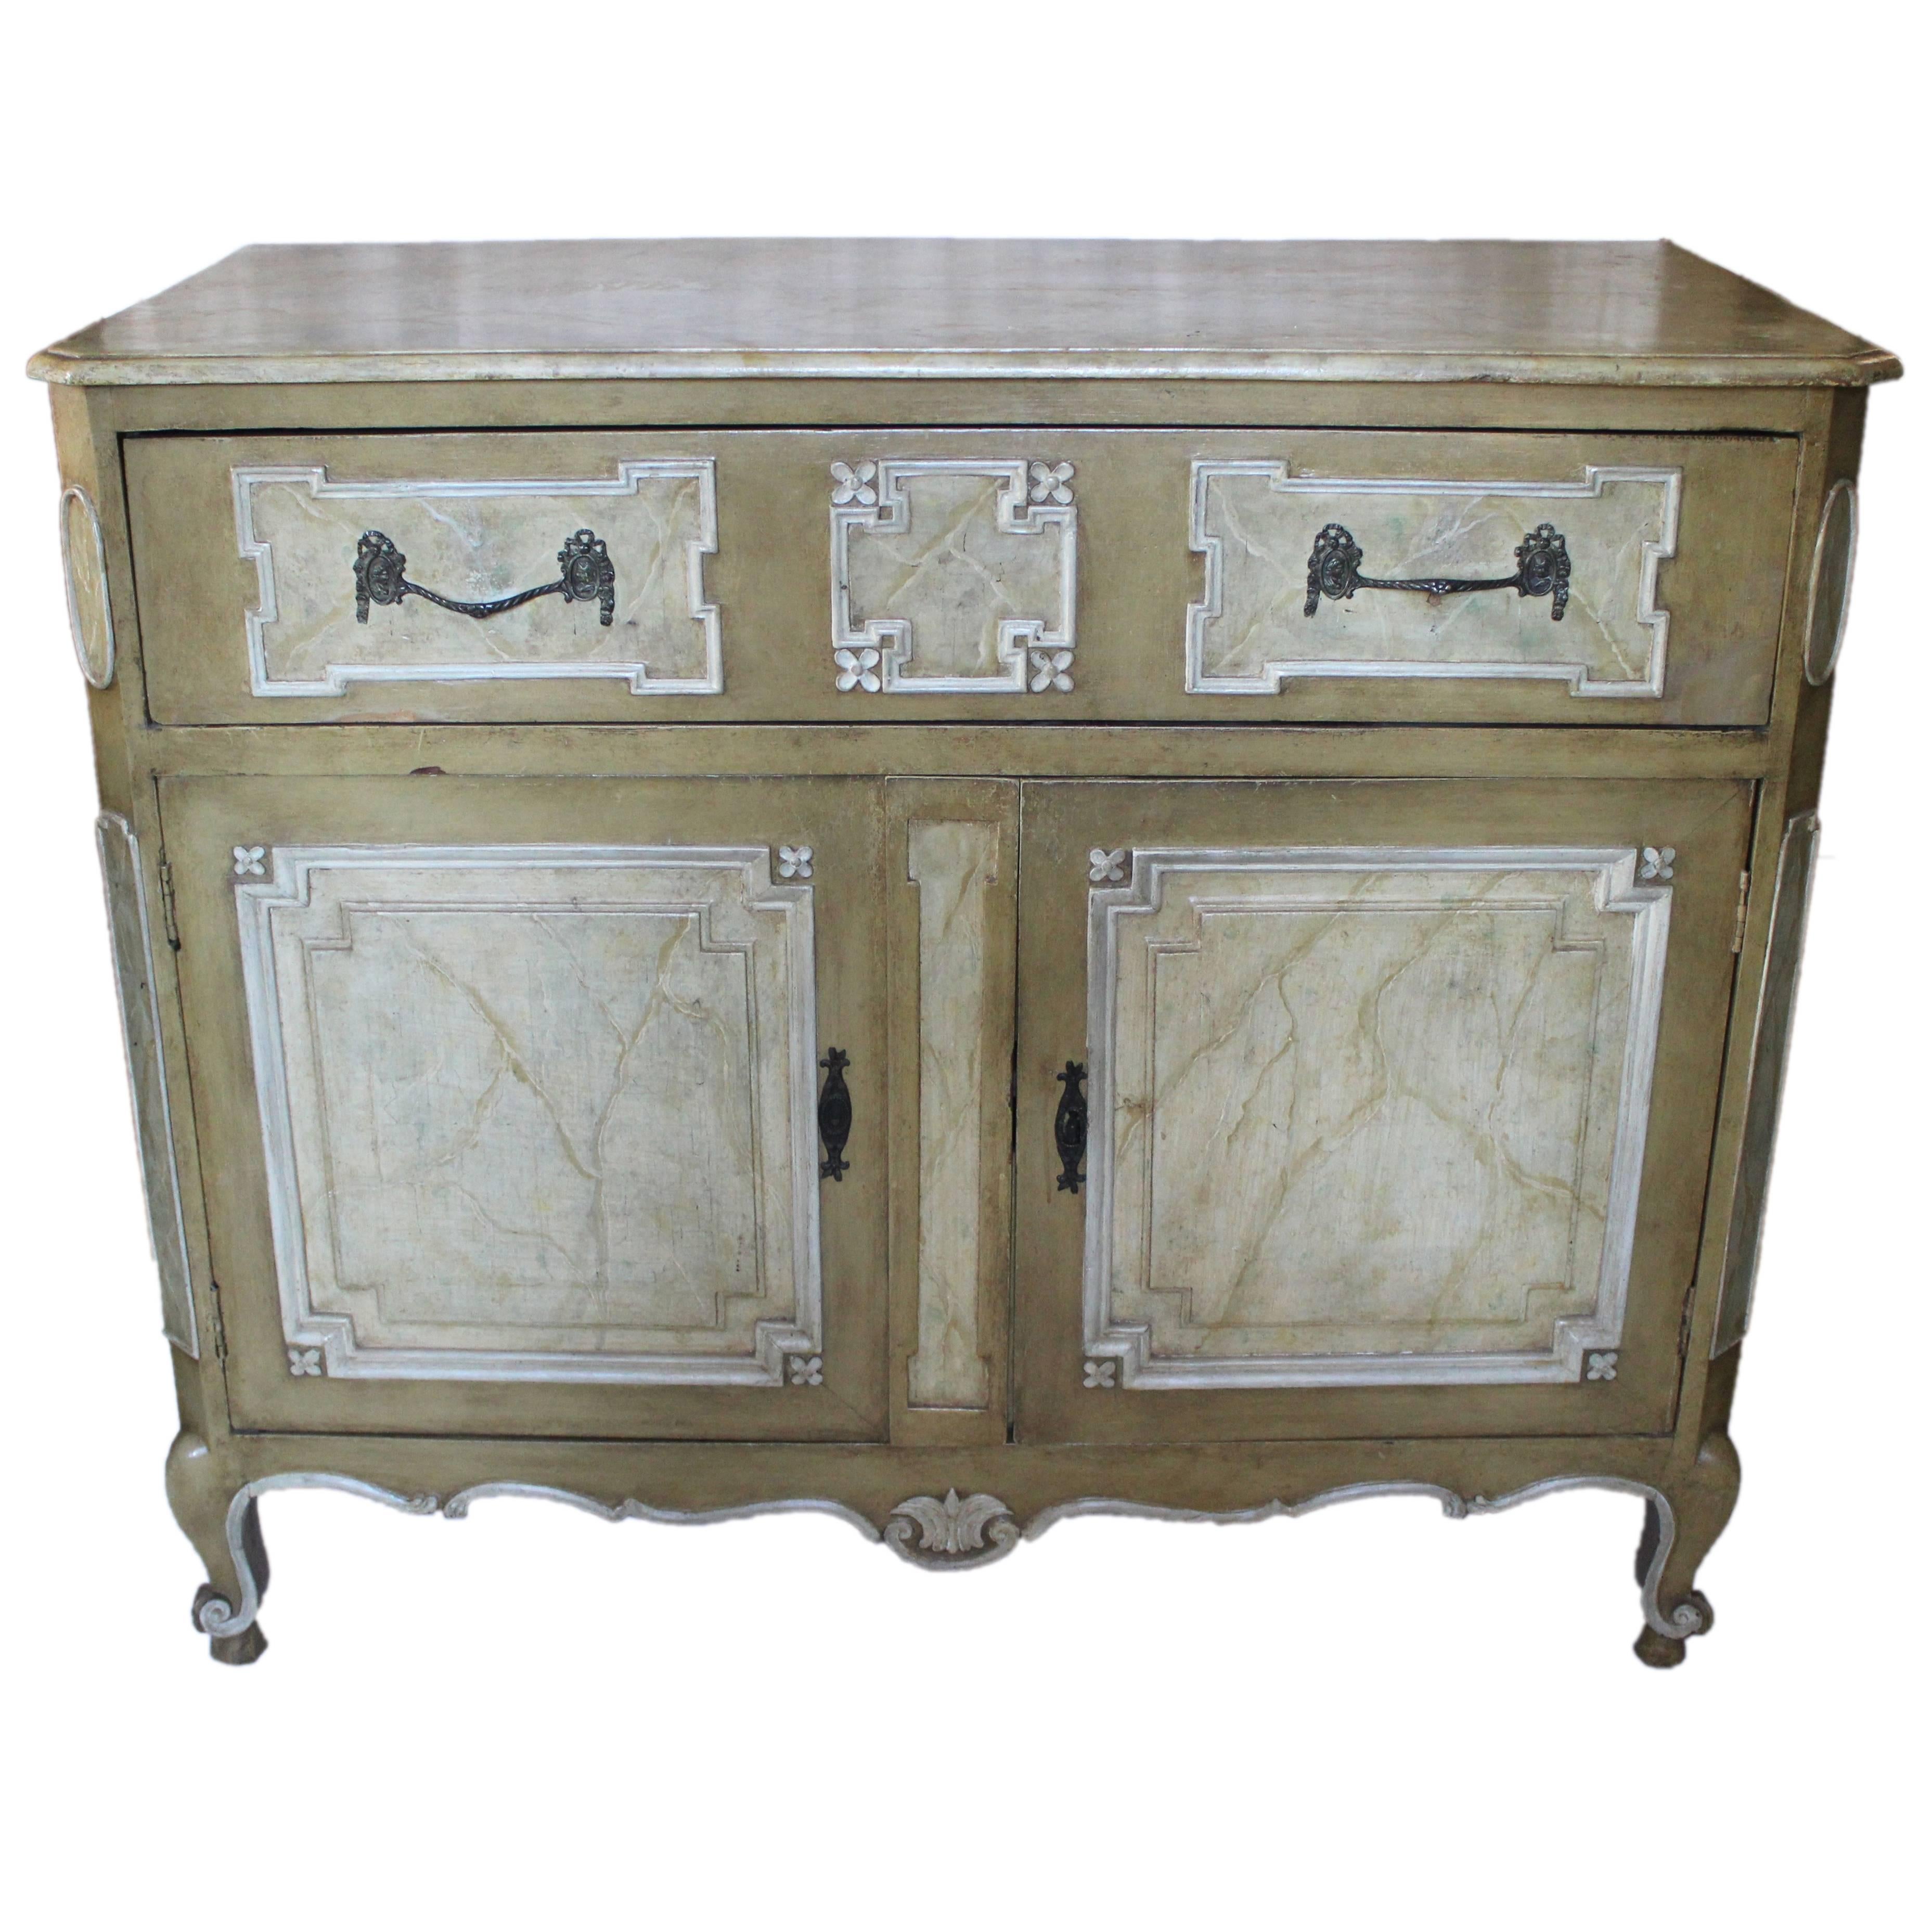 19th Century Painted Cabinet